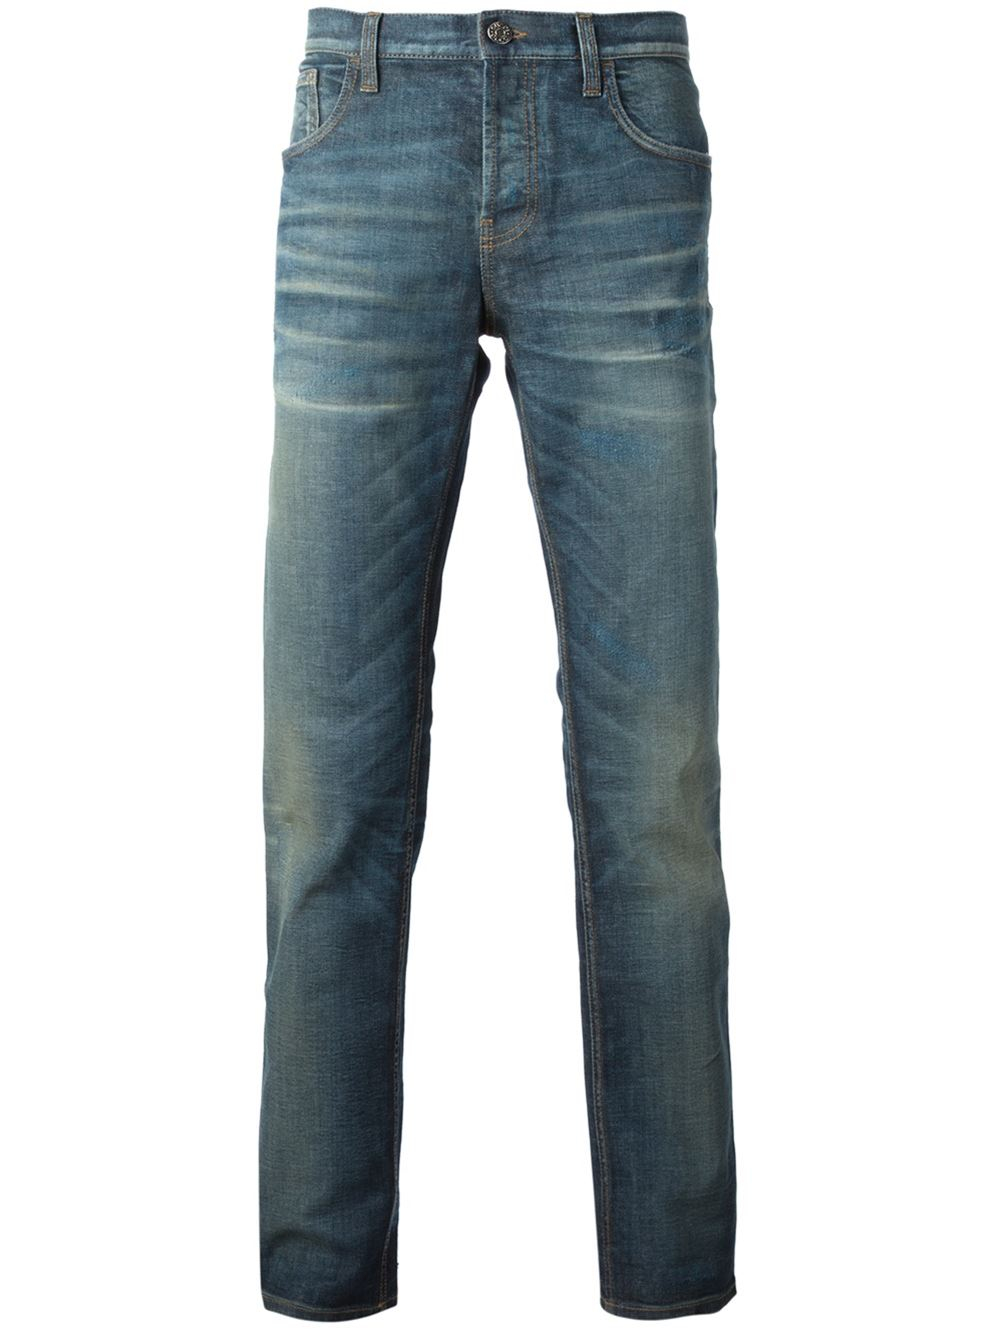 Lyst - Gucci Straight Leg Jeans in Blue for Men